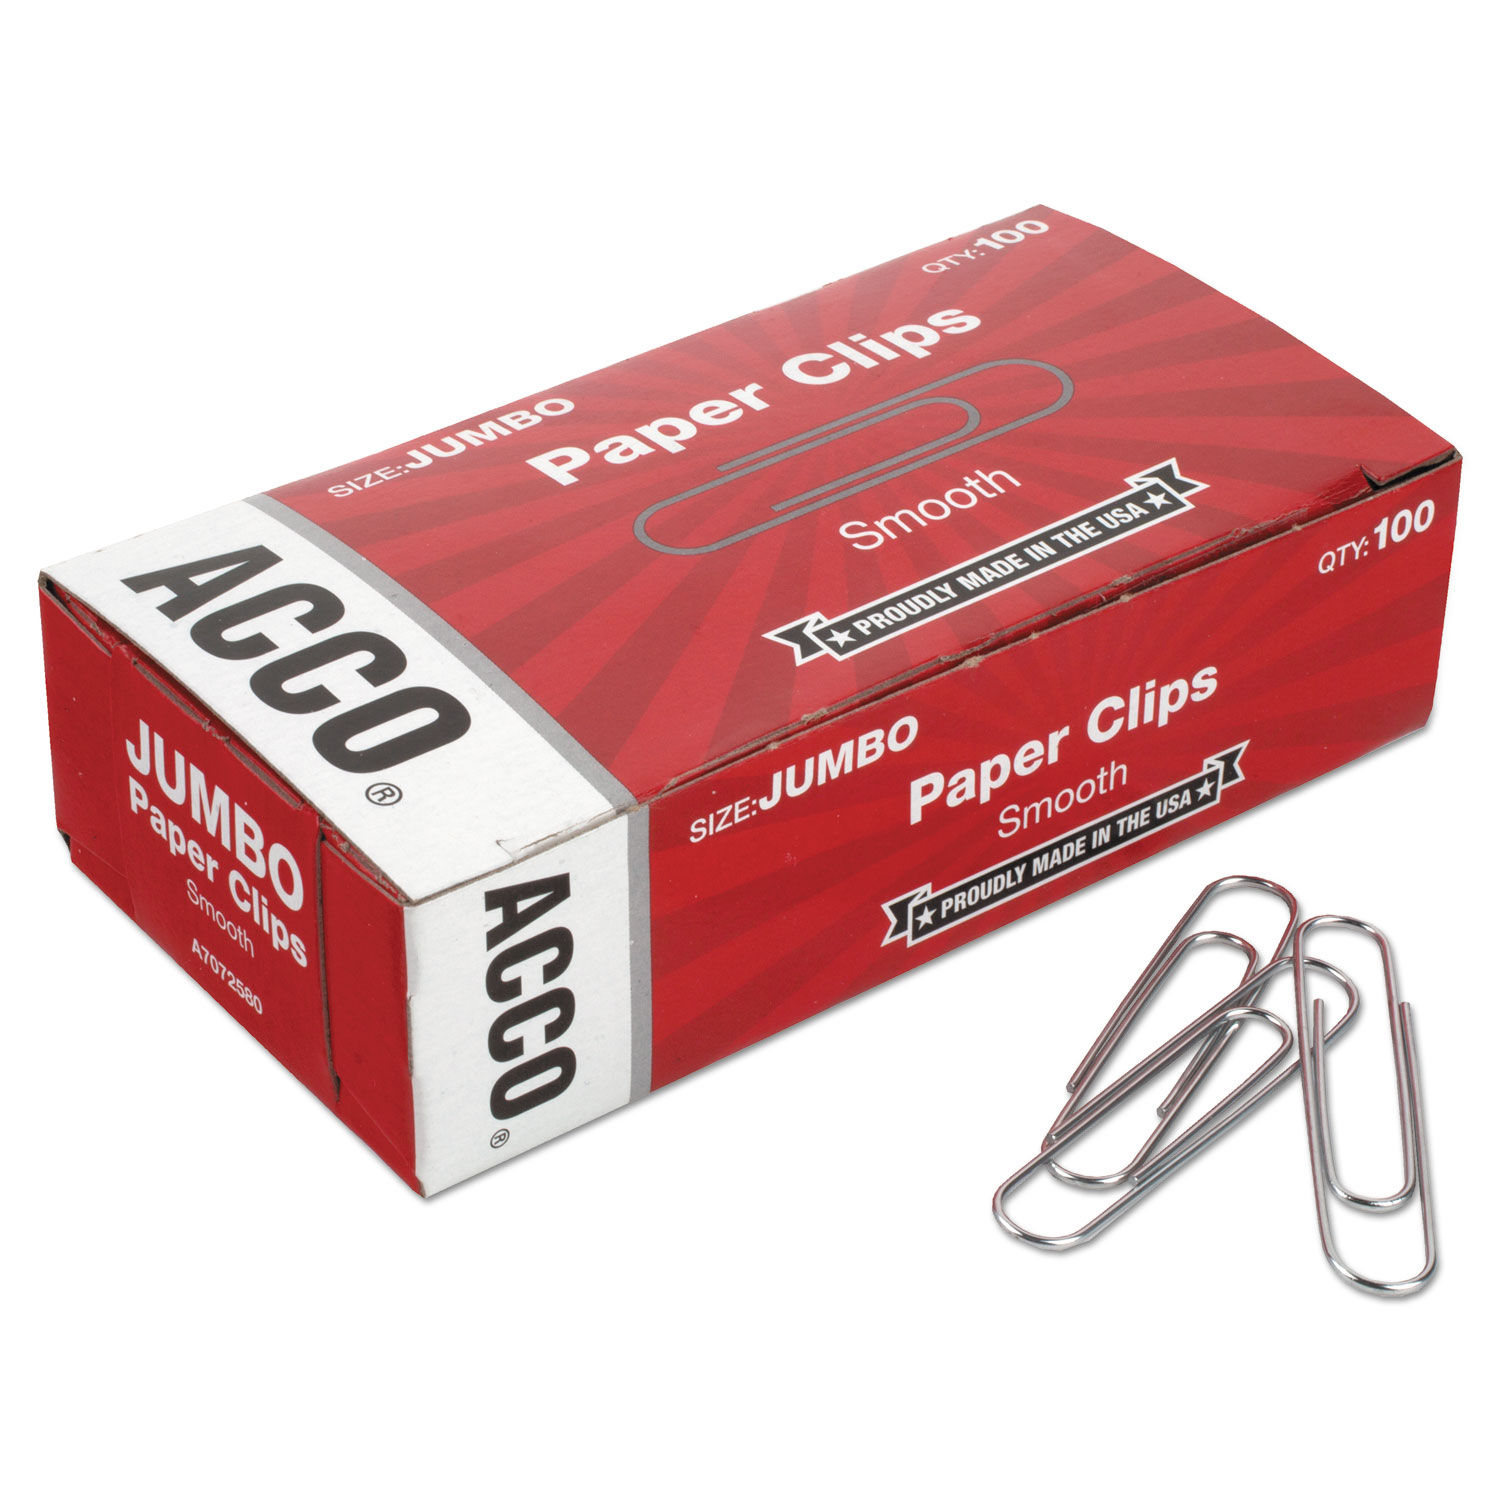 Paper Clips Jumbo, Smooth, Silver, 100 Clips/Box, 10 Boxes/Pack